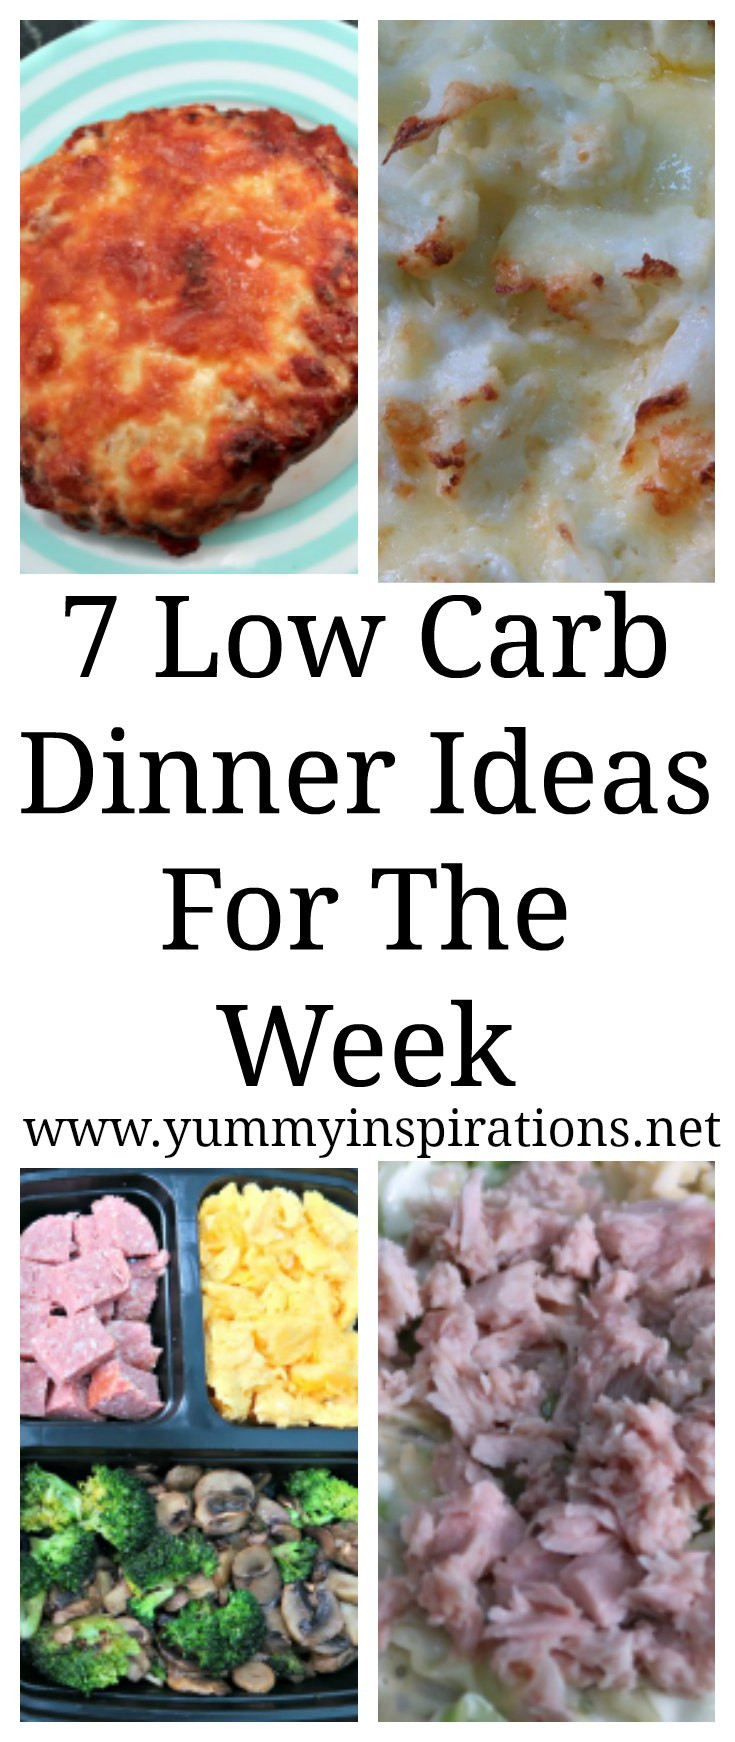 Low Carb Menus And Recipes
 7 Low Carb Dinner Ideas Easy Keto Dinner Meal Recipes